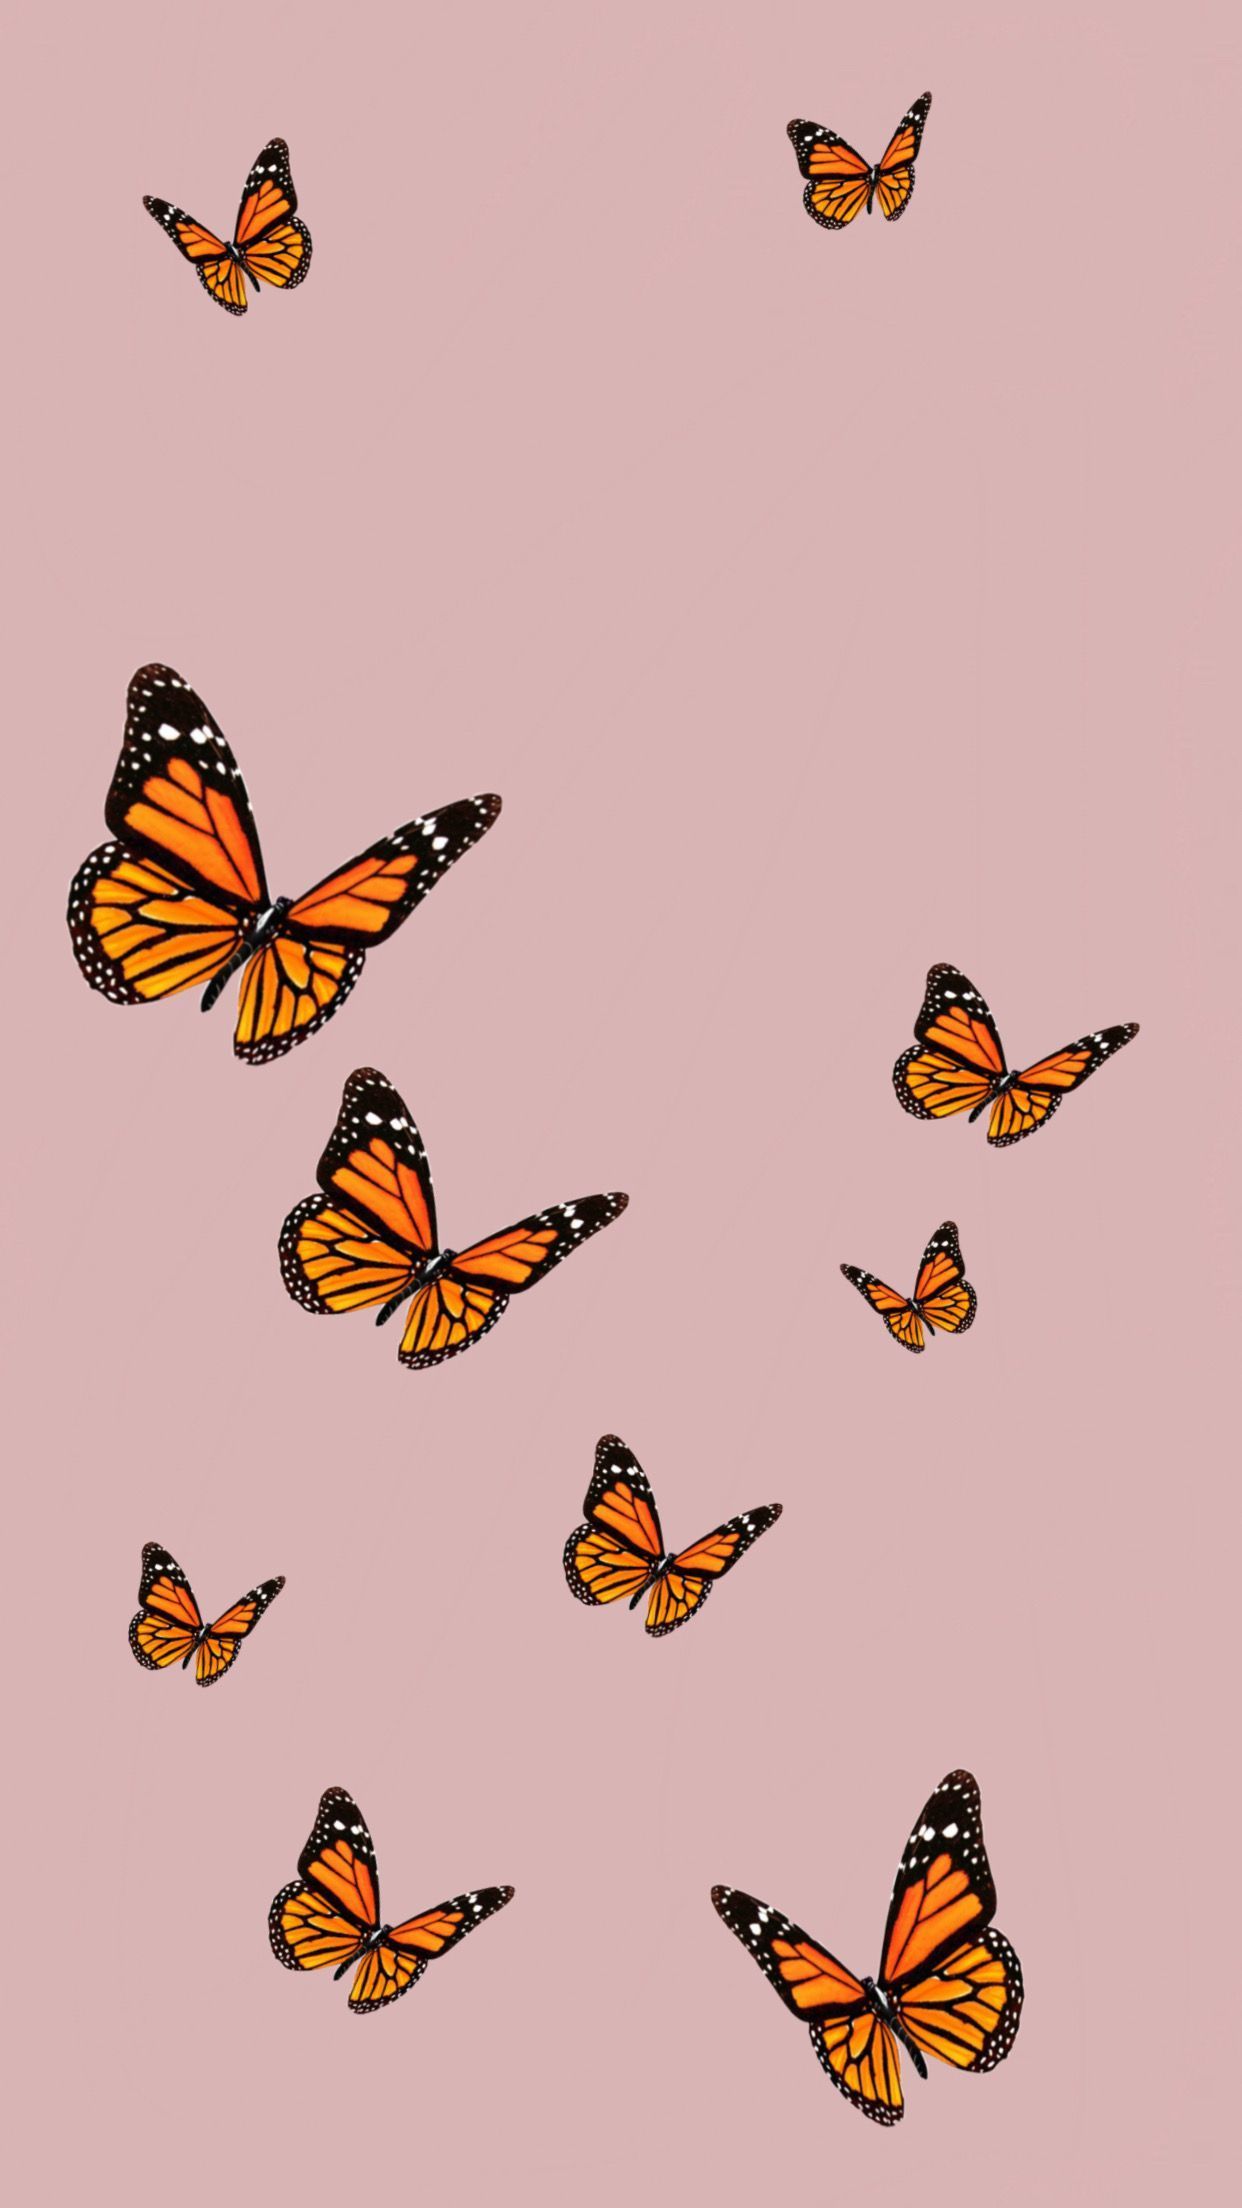 Butterfly Iphone Backgrounds